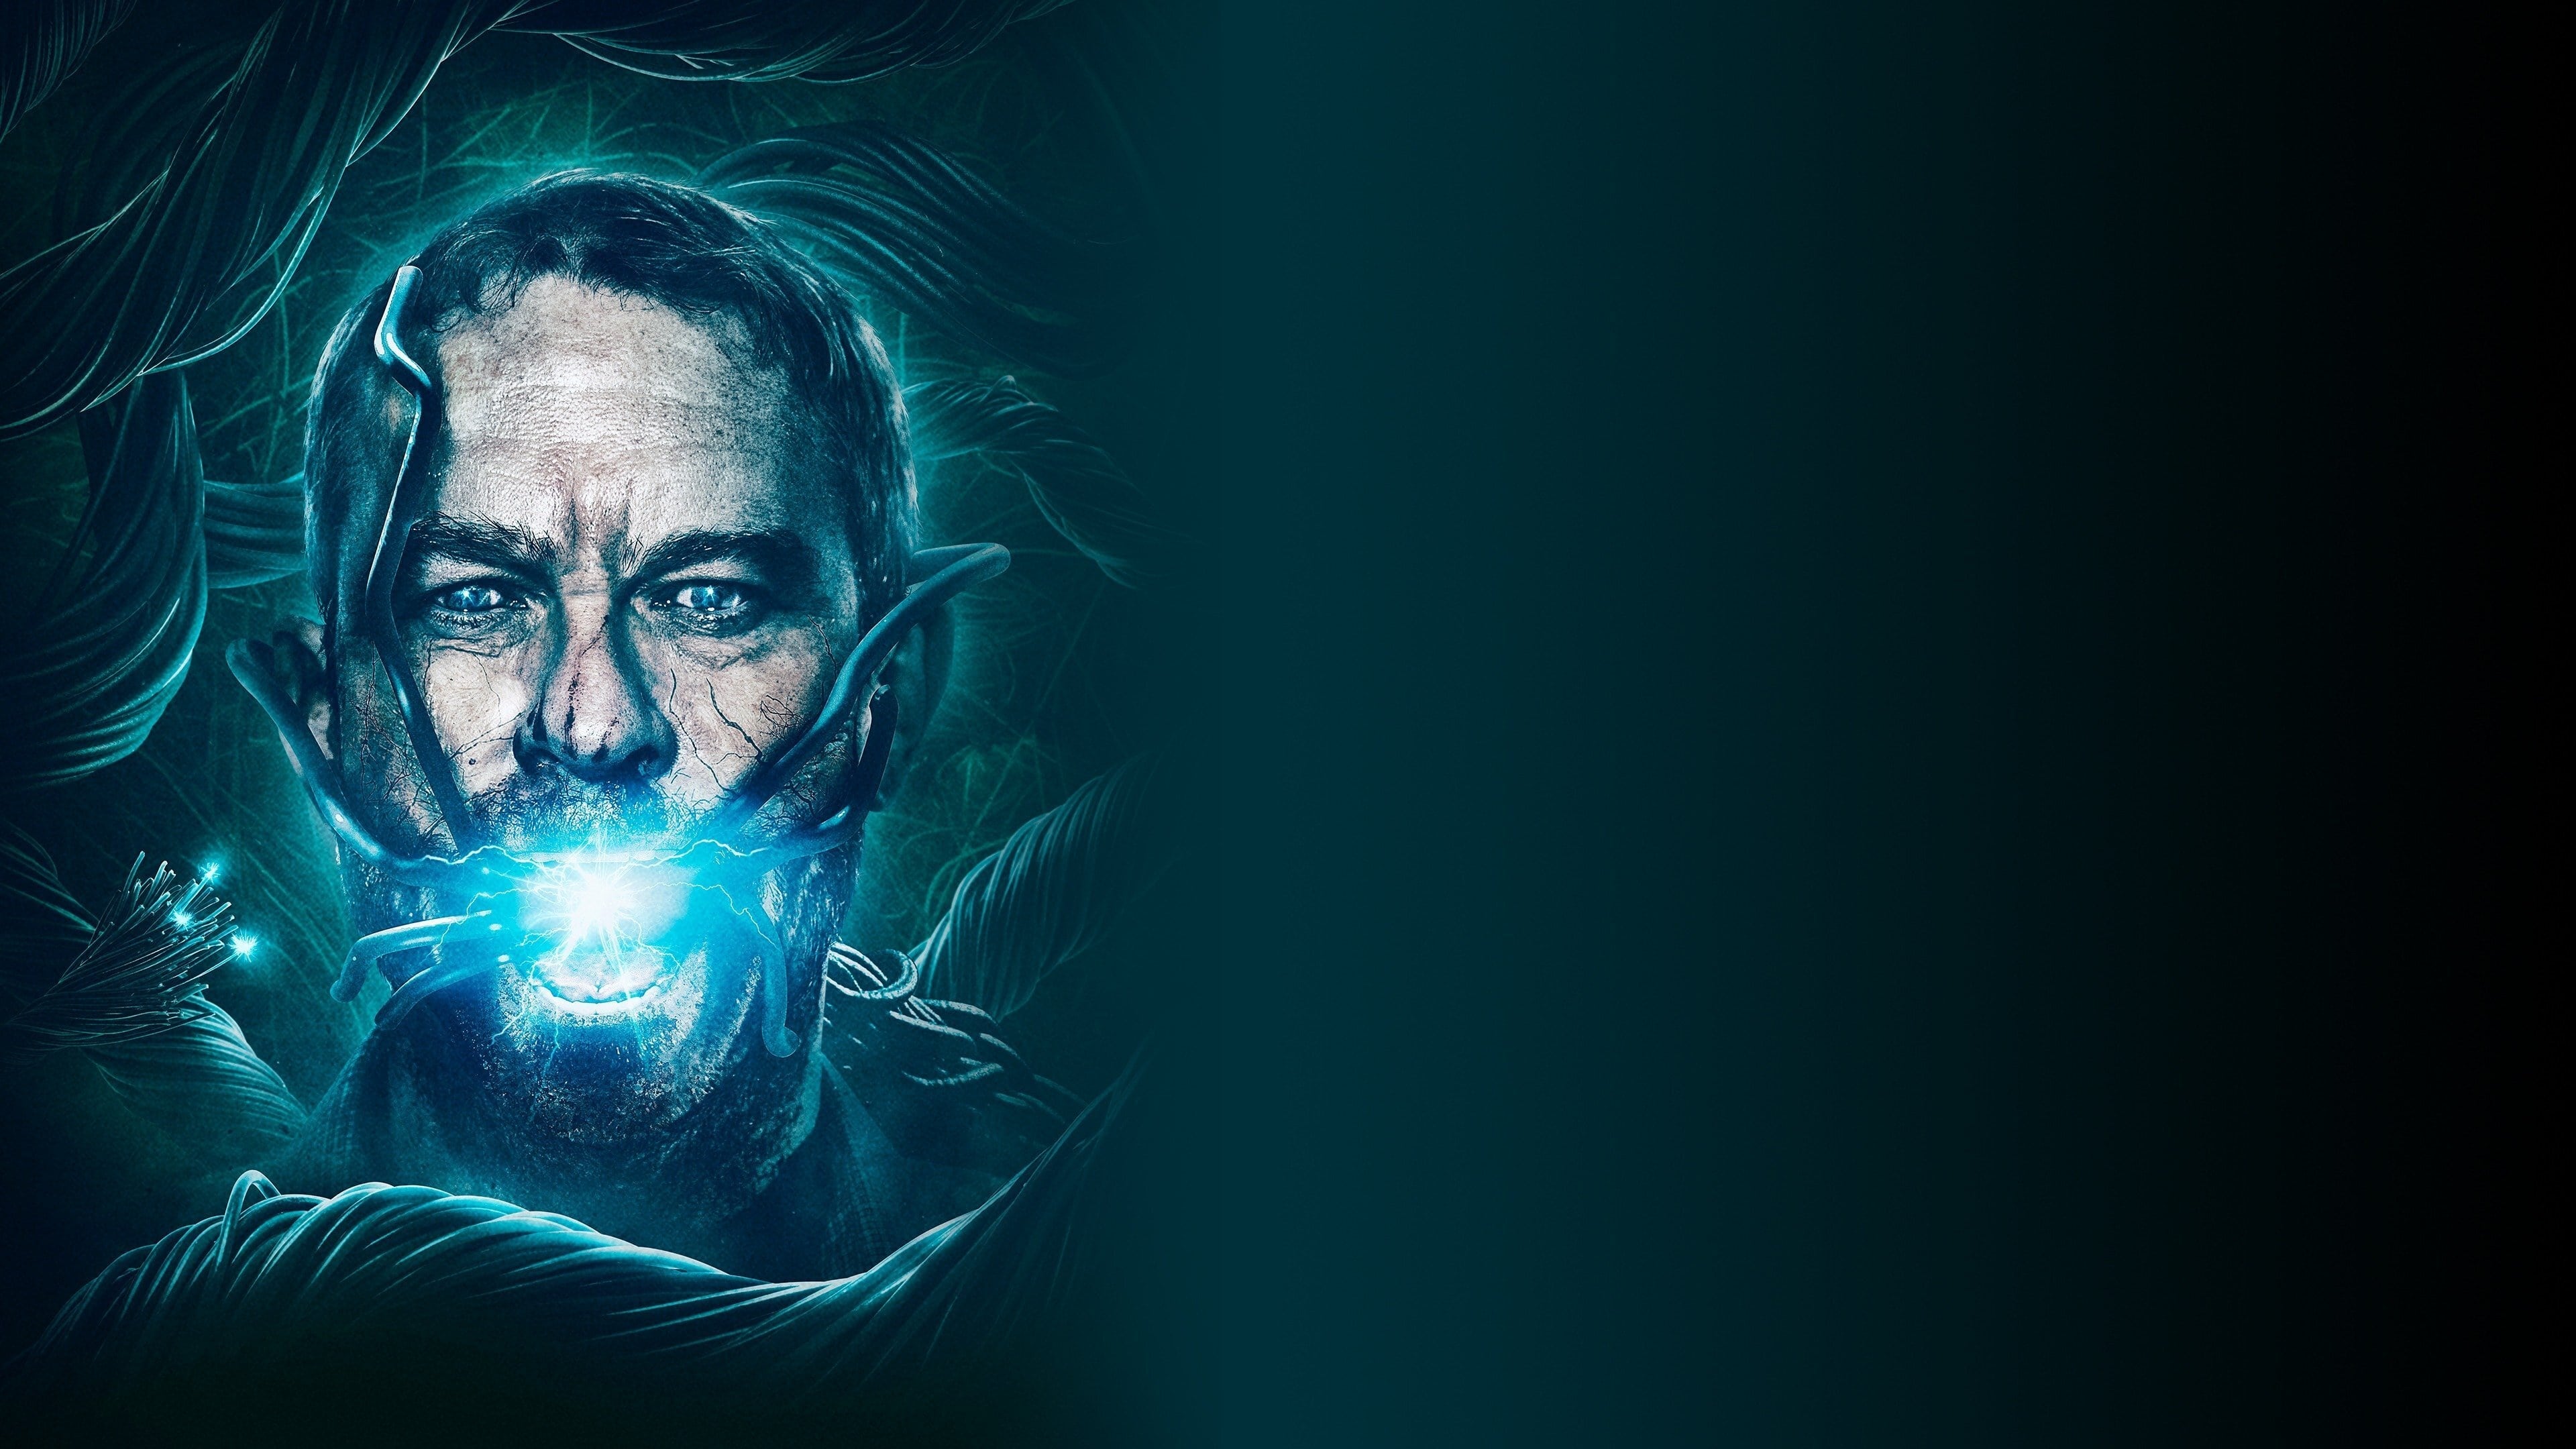 Await Further Instructions 2018 123movies